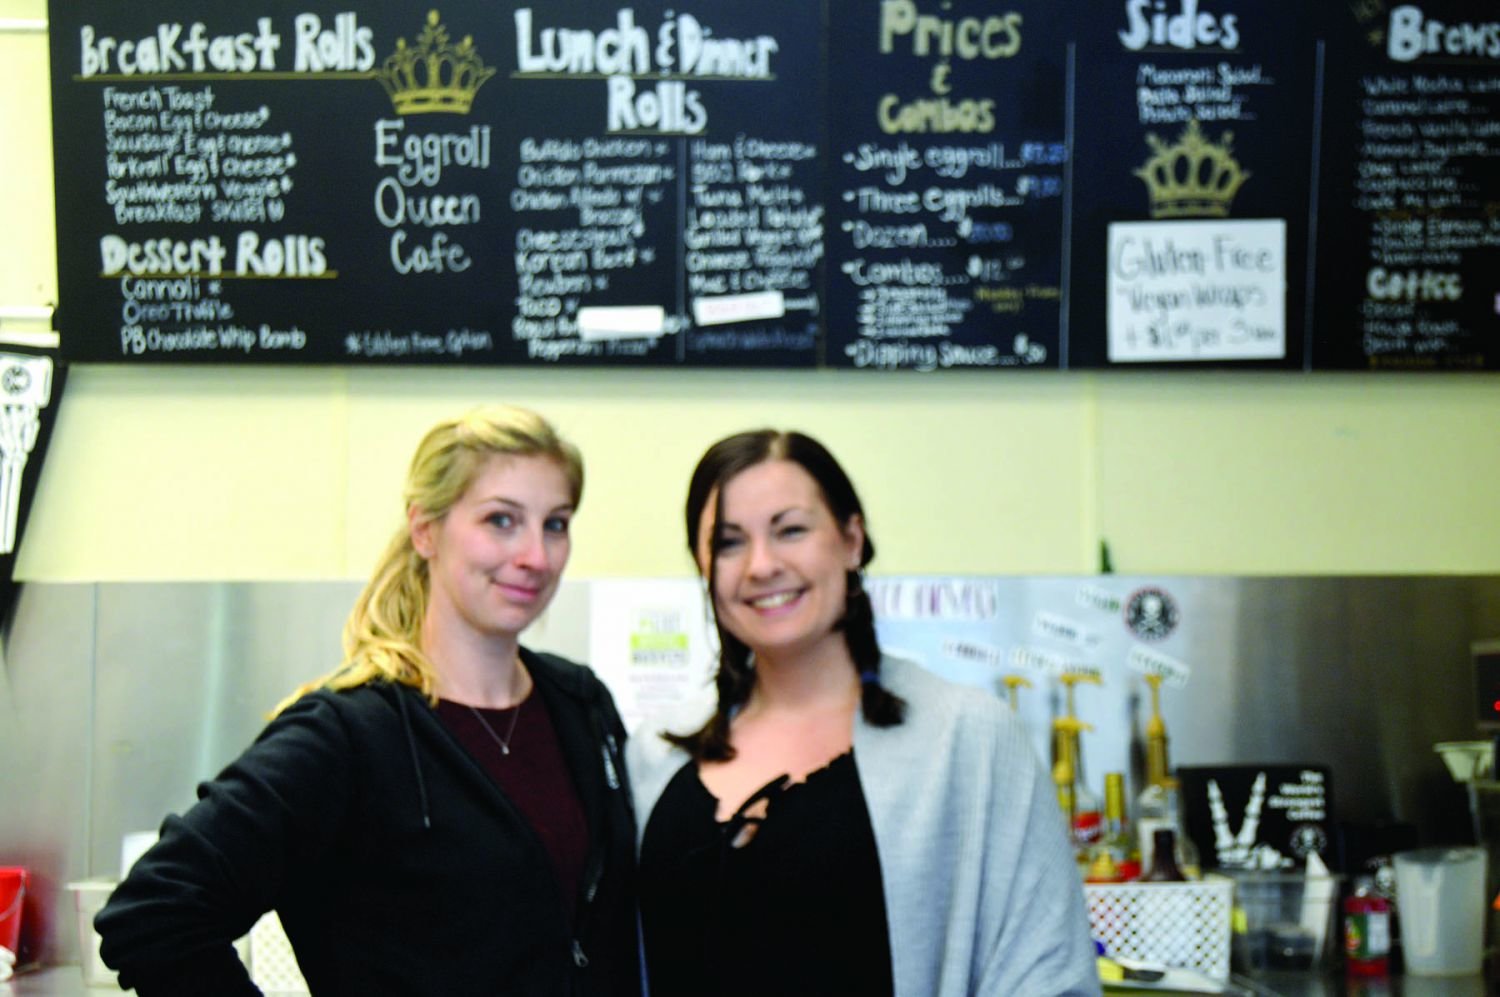 Stephanie Hrin, right, owns the Eggroll Queen Café in Chalfont, where her sister Andrea Smith is manager. Photograph by Susan S. Yeske.